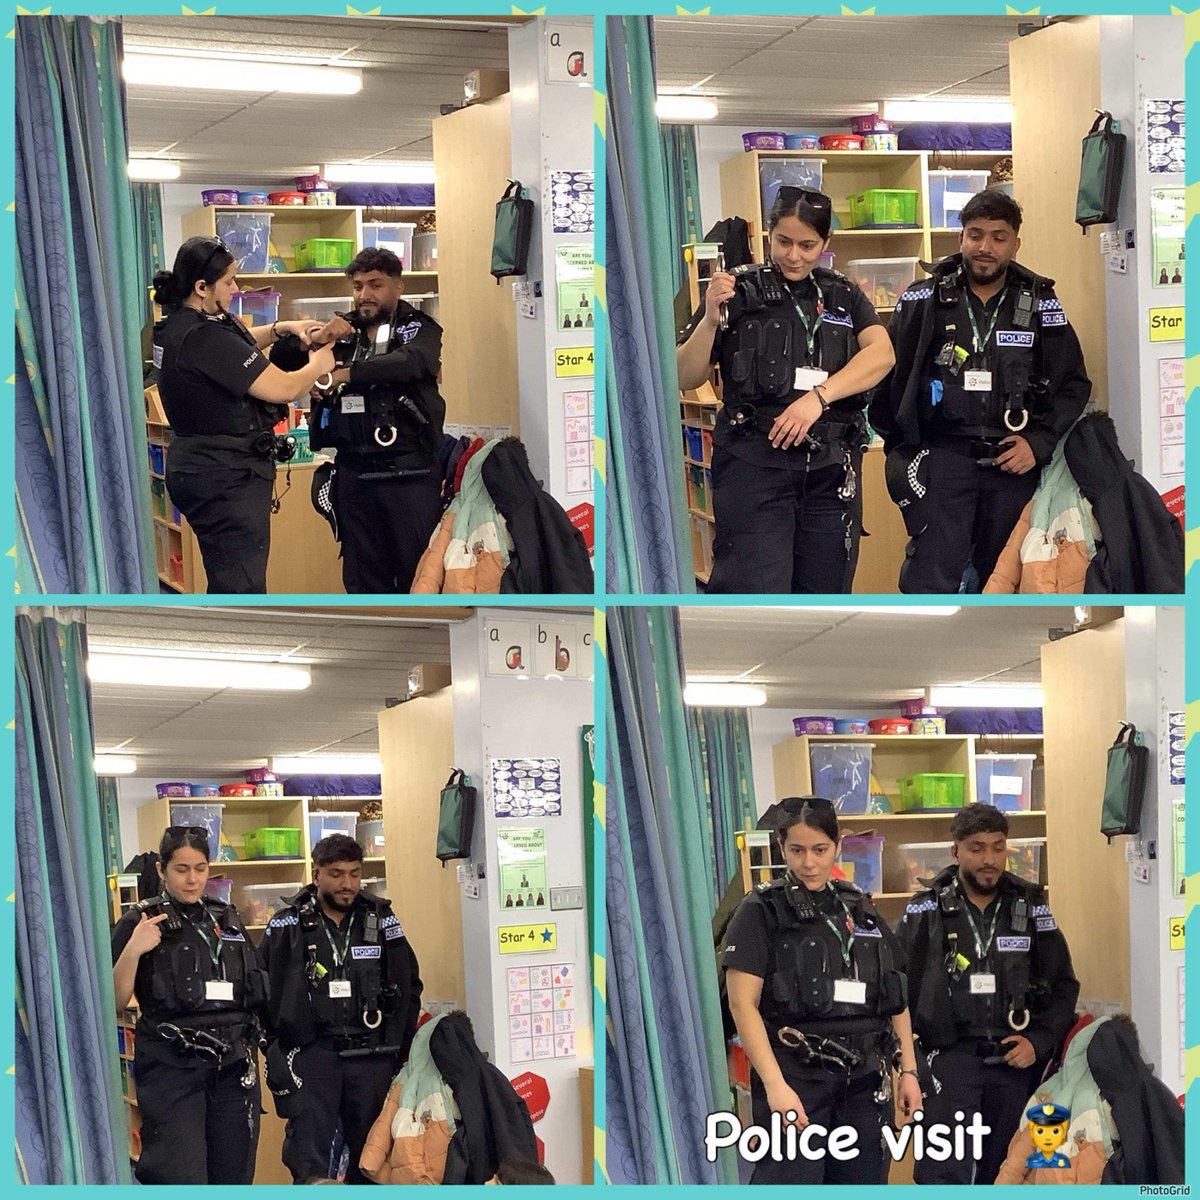 The Stars children had a very special visit from some police officers last week. They were able to learn about their jobs, the equipment they use and the children had the opportunity to ask them lots of questions. 👮‍♀️ 🚓 @leicspolice